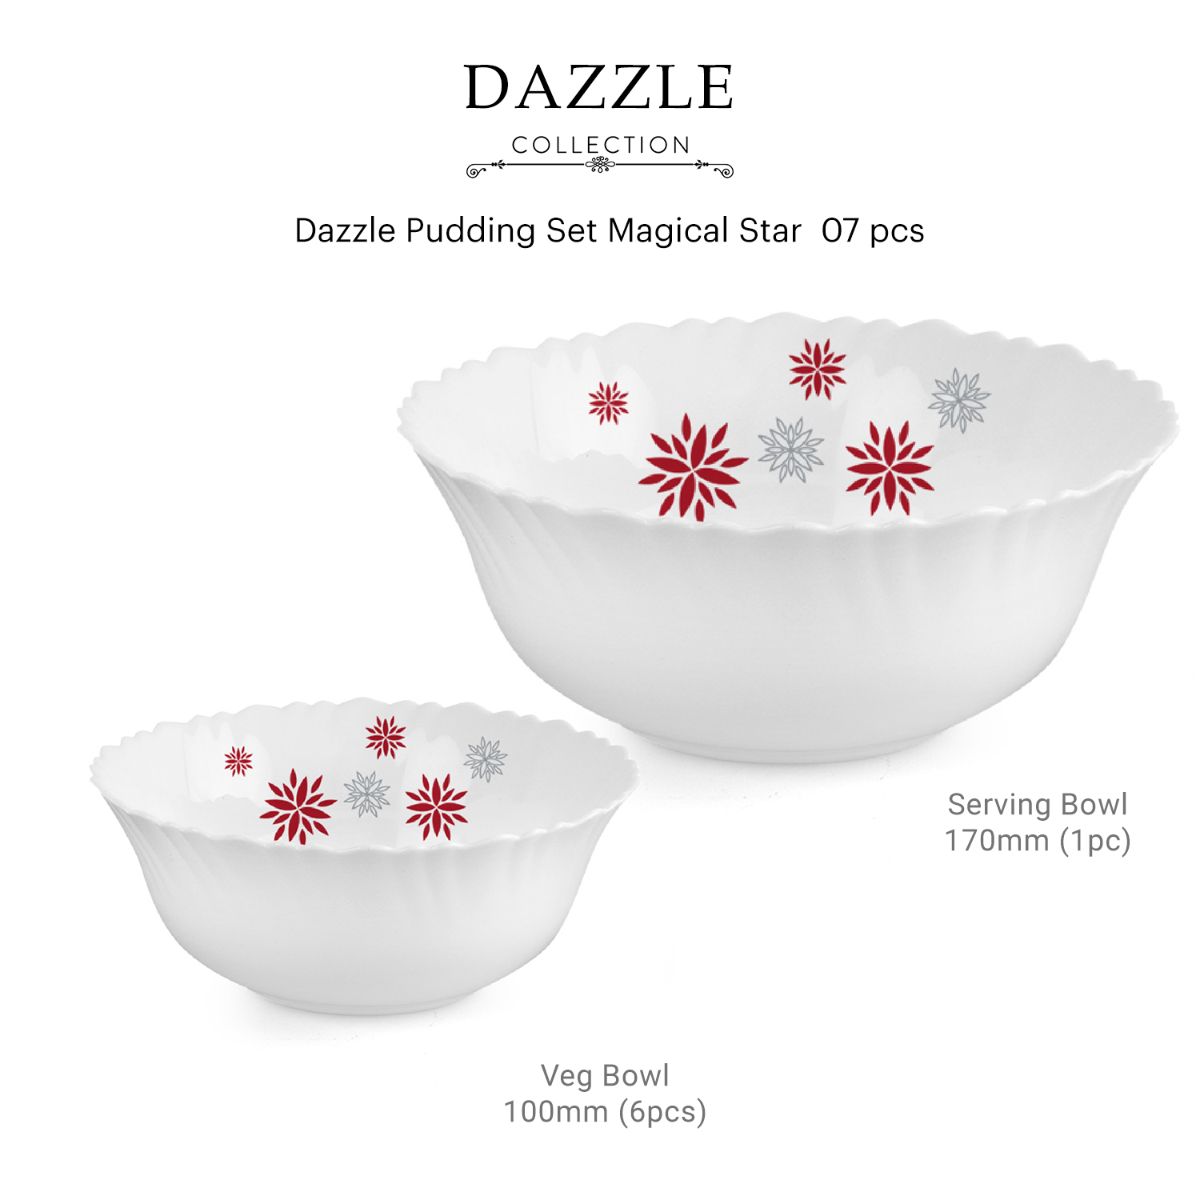 Dazzle Series Pudding Gift Set, 7 Pieces Magical Star / 7 Pieces